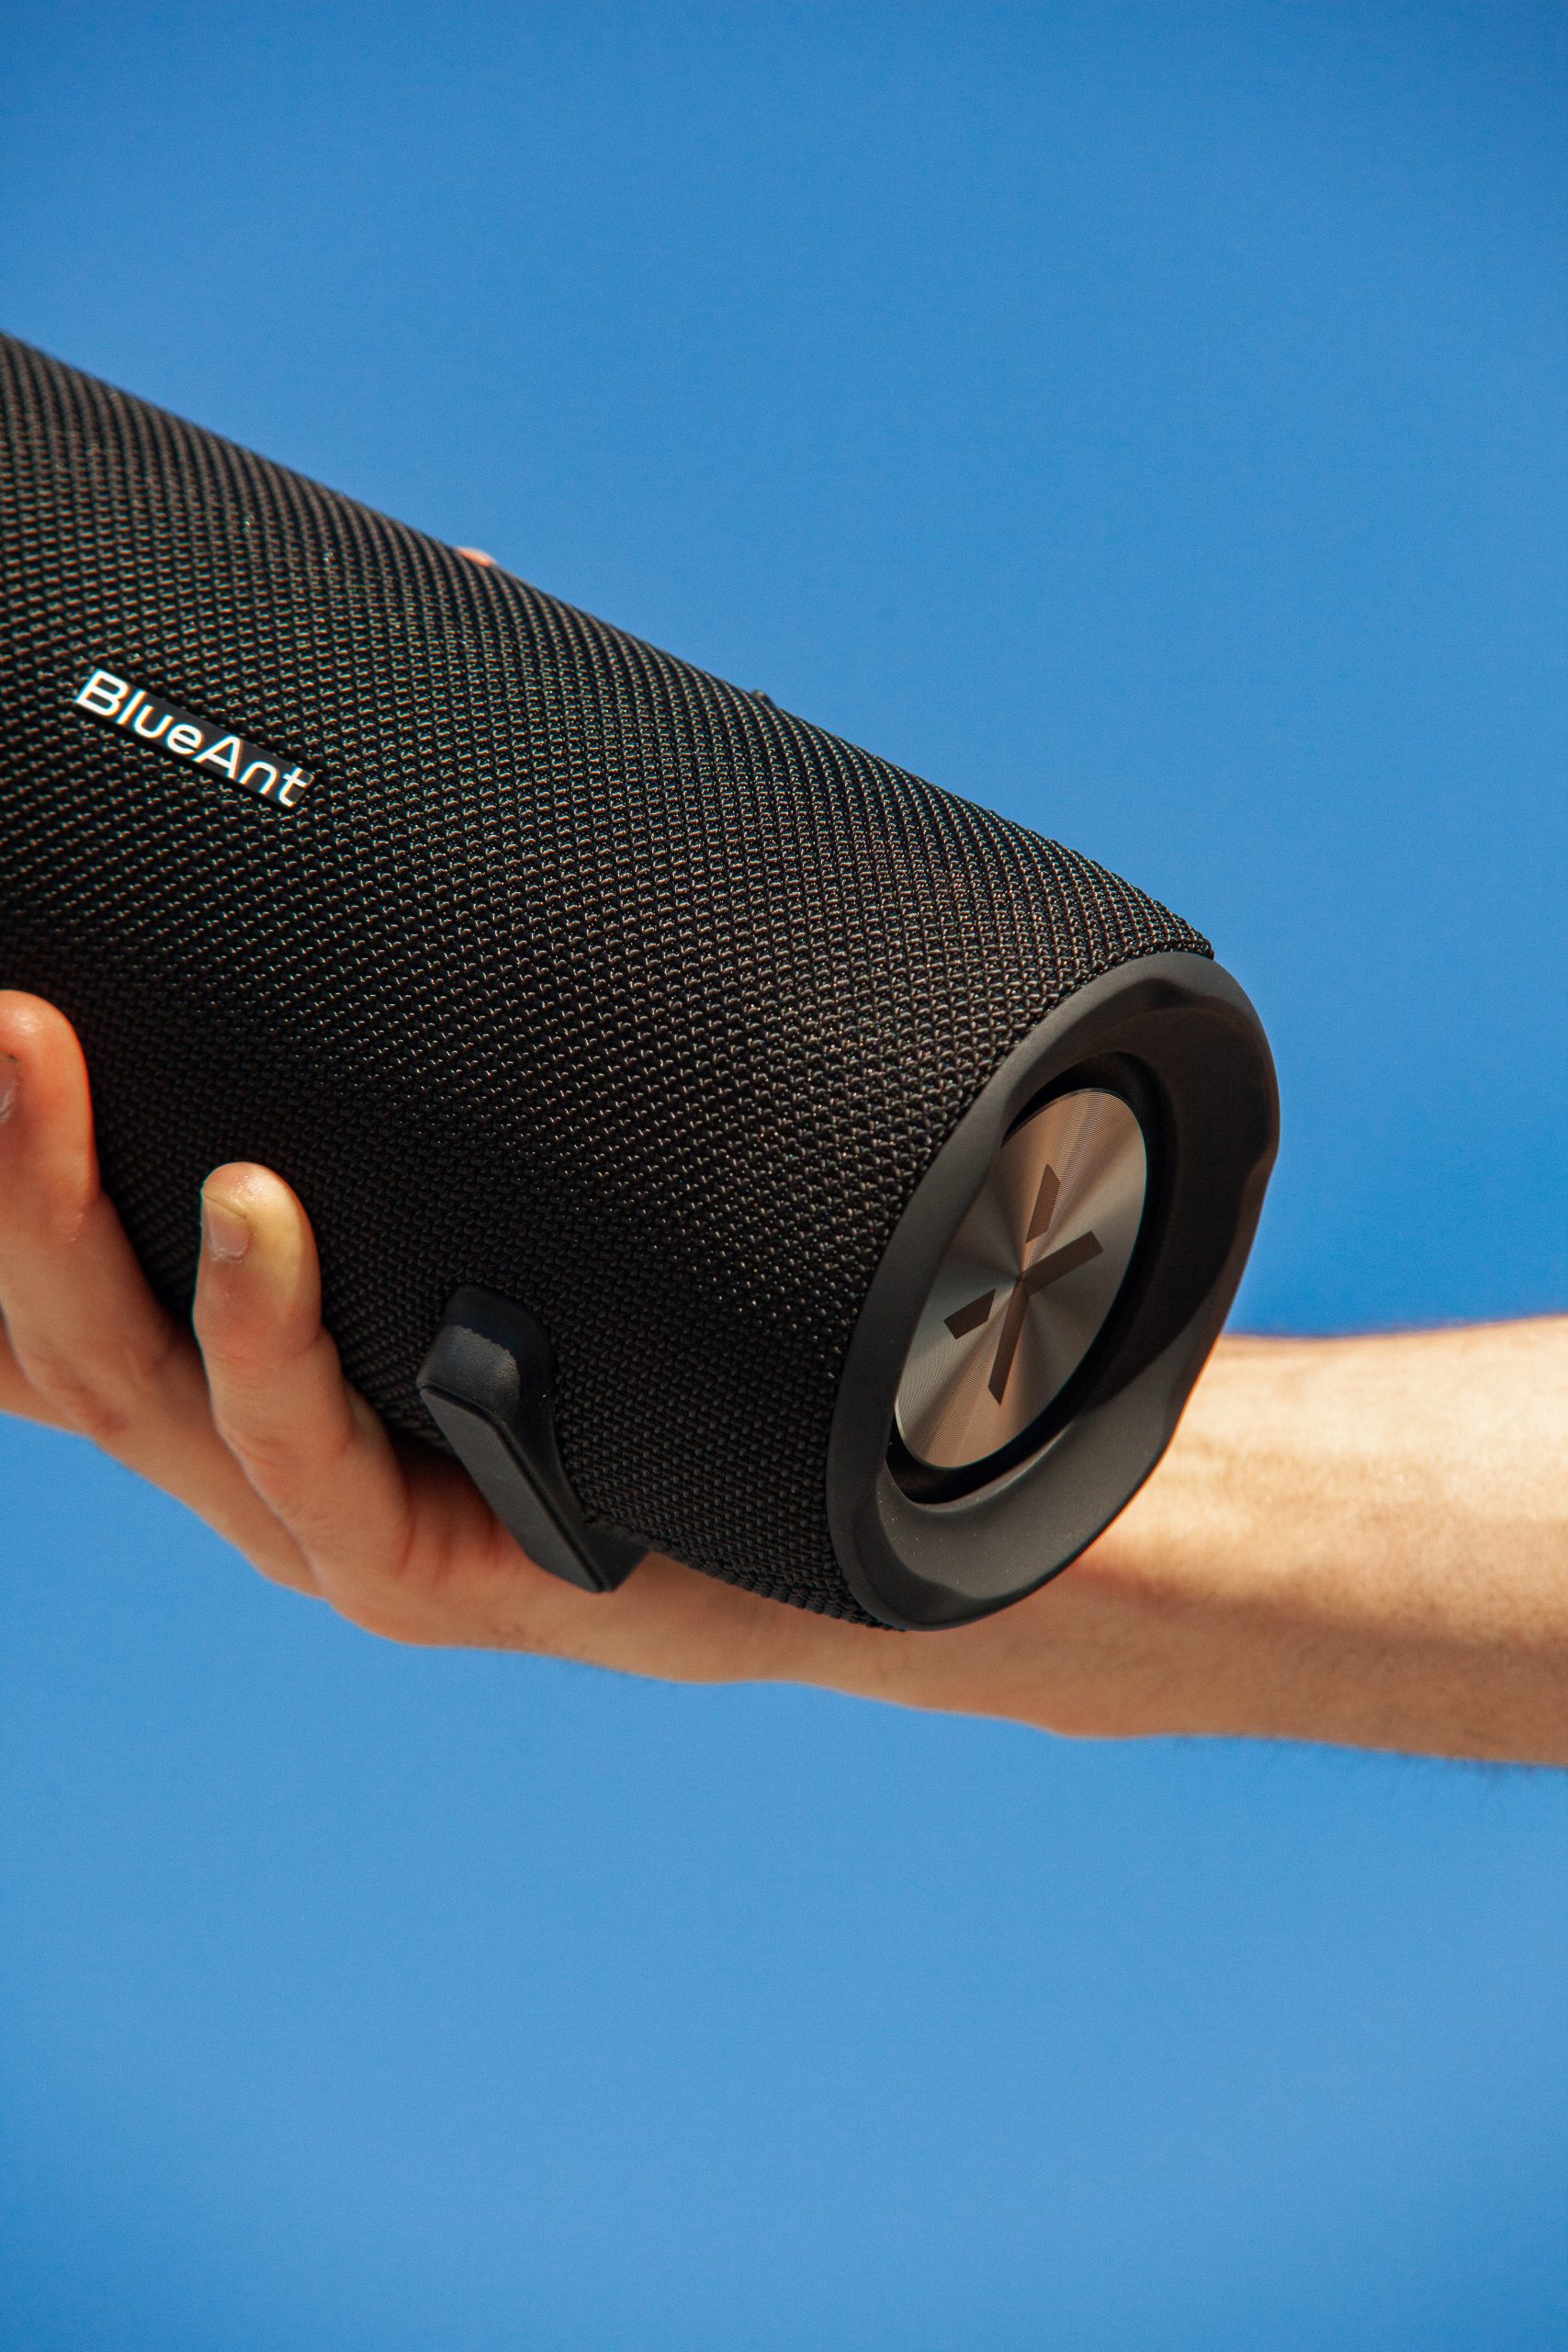 X3 BlueAnt 4 scaled BlueAnt’s X3 Portable Speaker Released In Time For Oz Summer